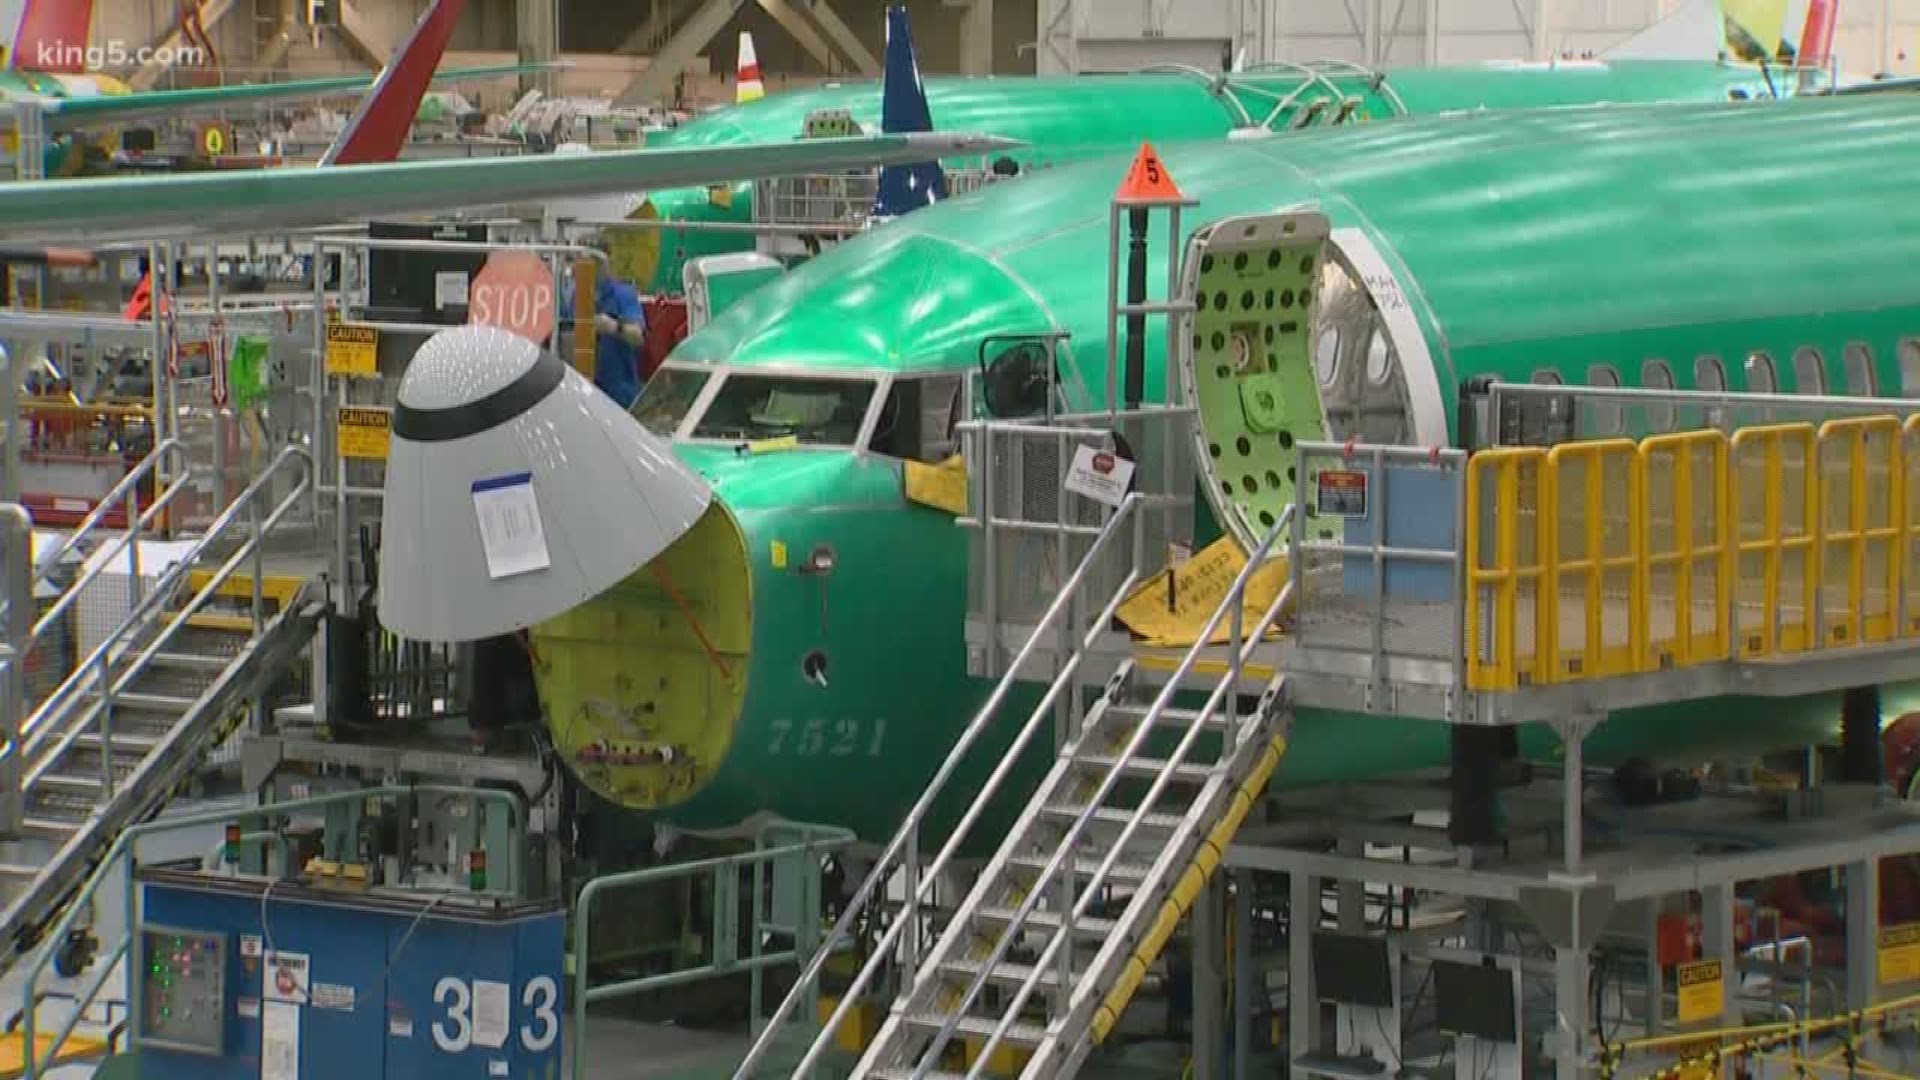 Boeing shares fell $12.94, or 3.76 percent, by the market close Monday after dropping 6.8% Friday.